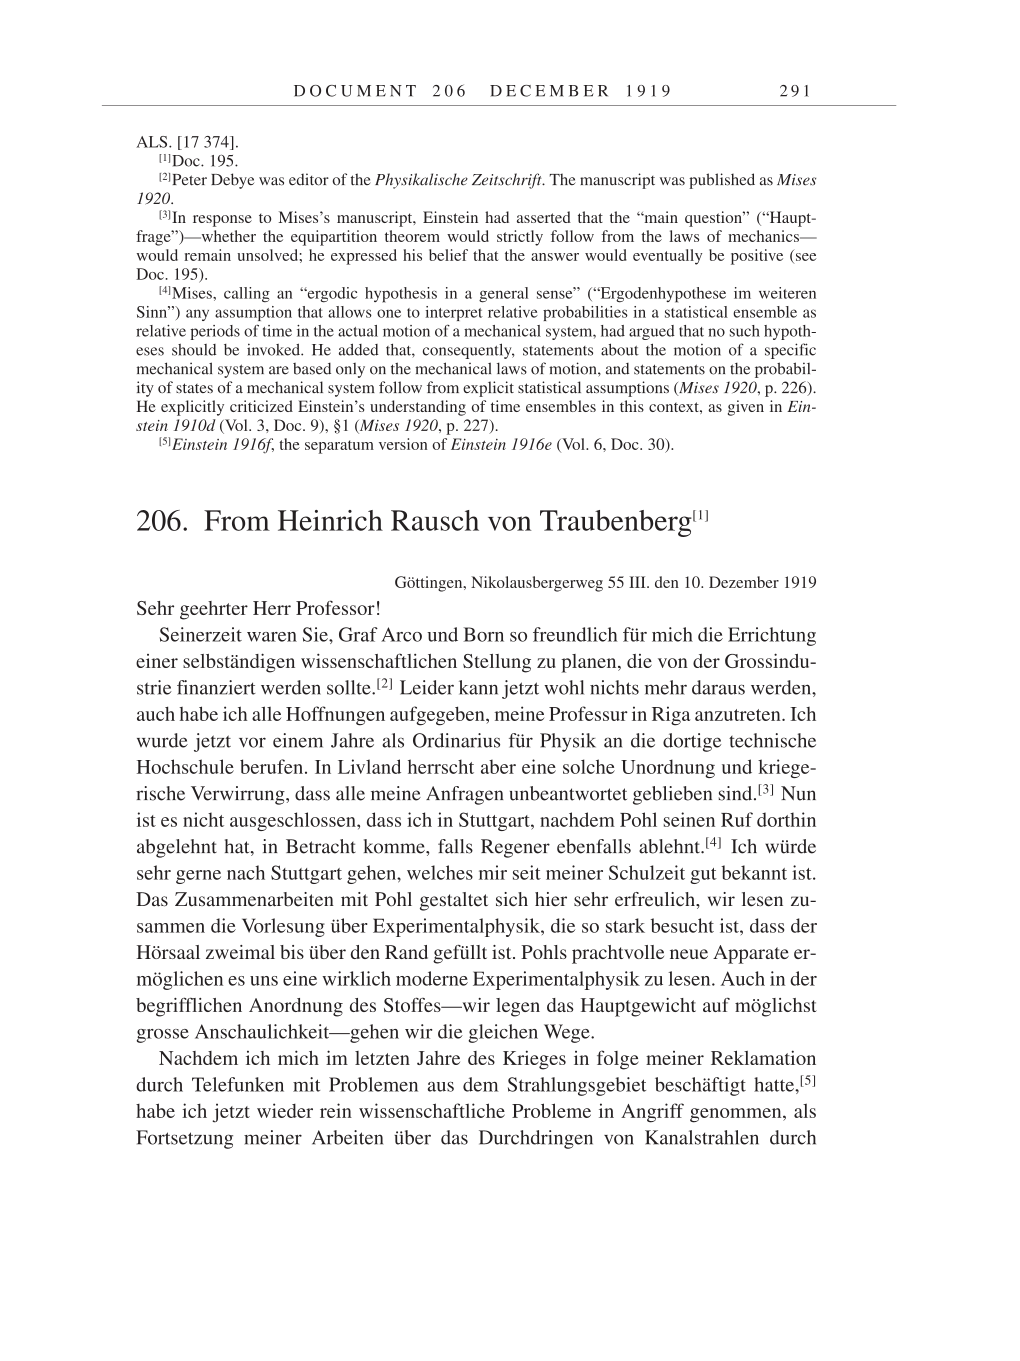 Volume 9: The Berlin Years: Correspondence January 1919-April 1920 page 291